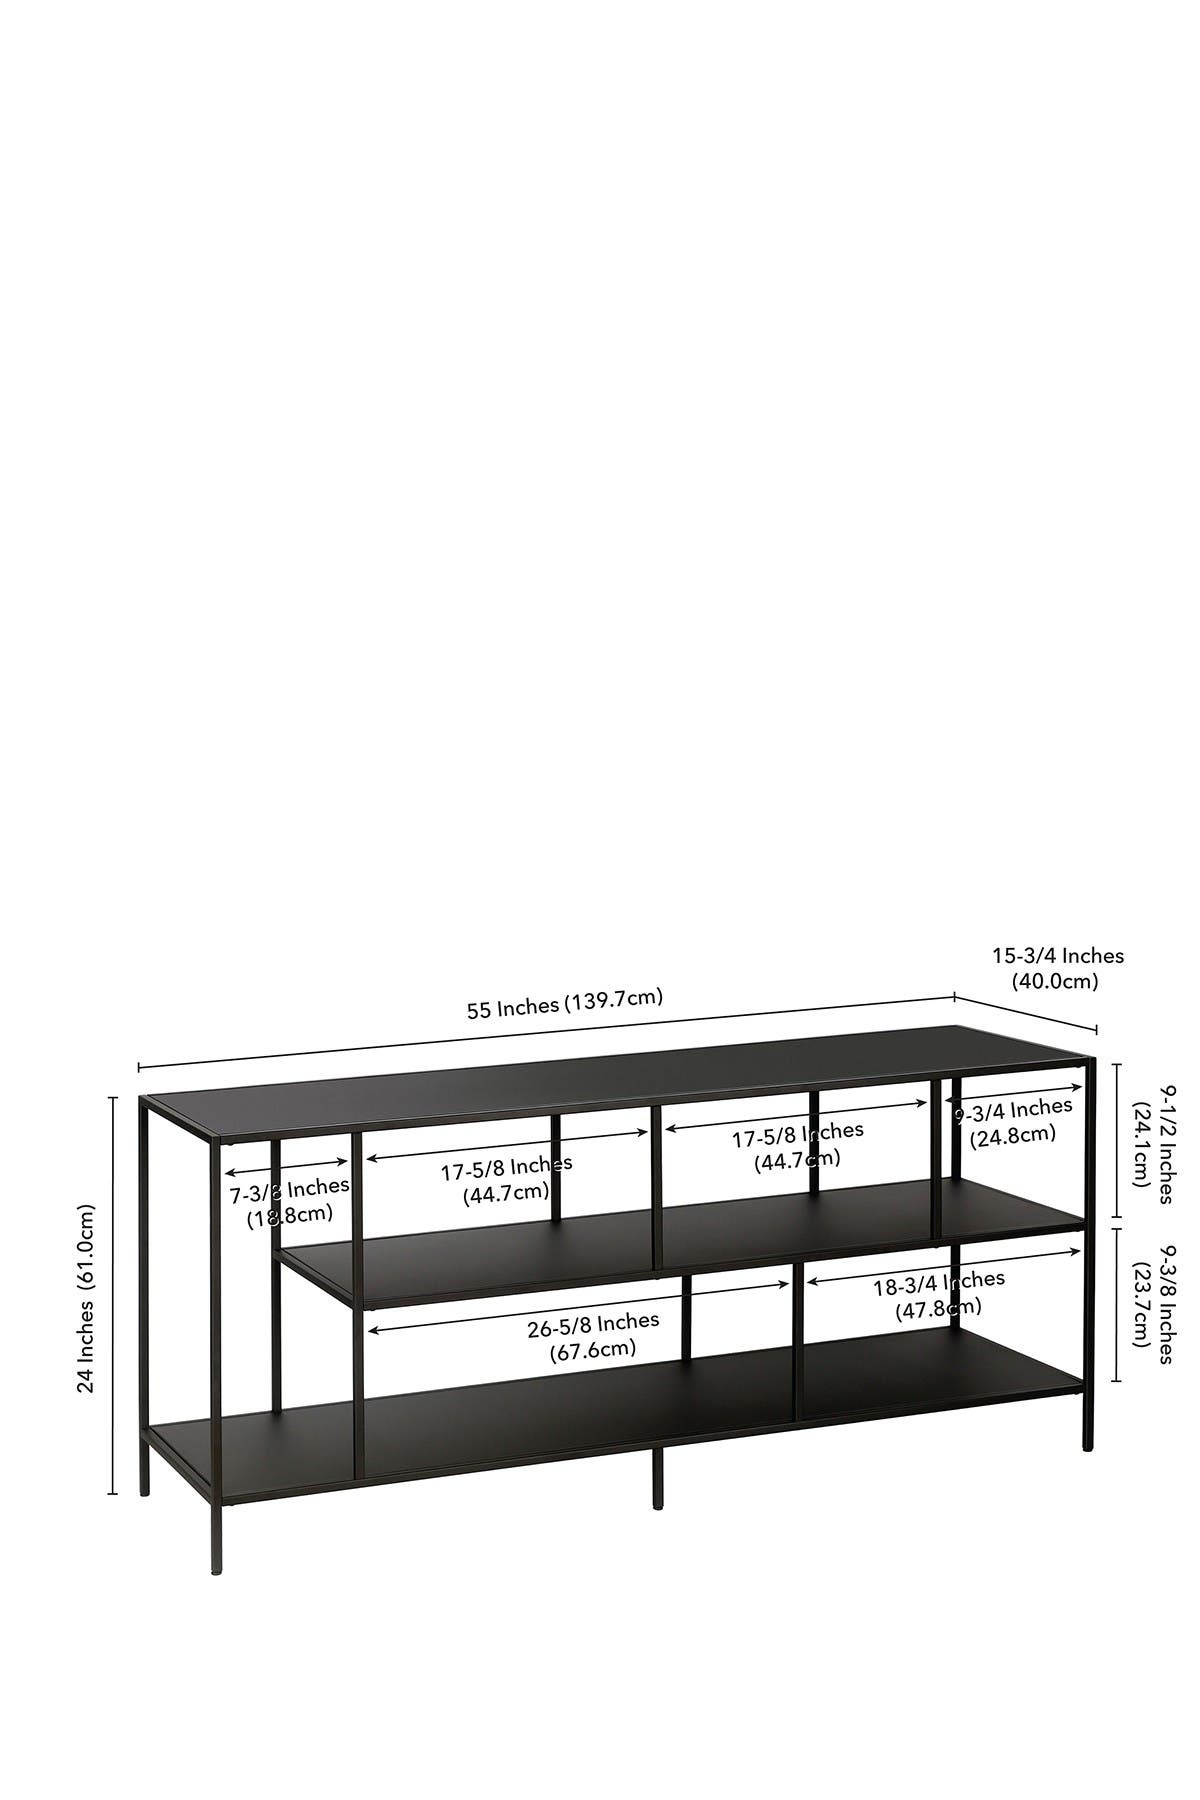 Addison And Lane Winthrop 55" Blackened Bronze Tv Stand With Metal Shelves In Rust/copper1